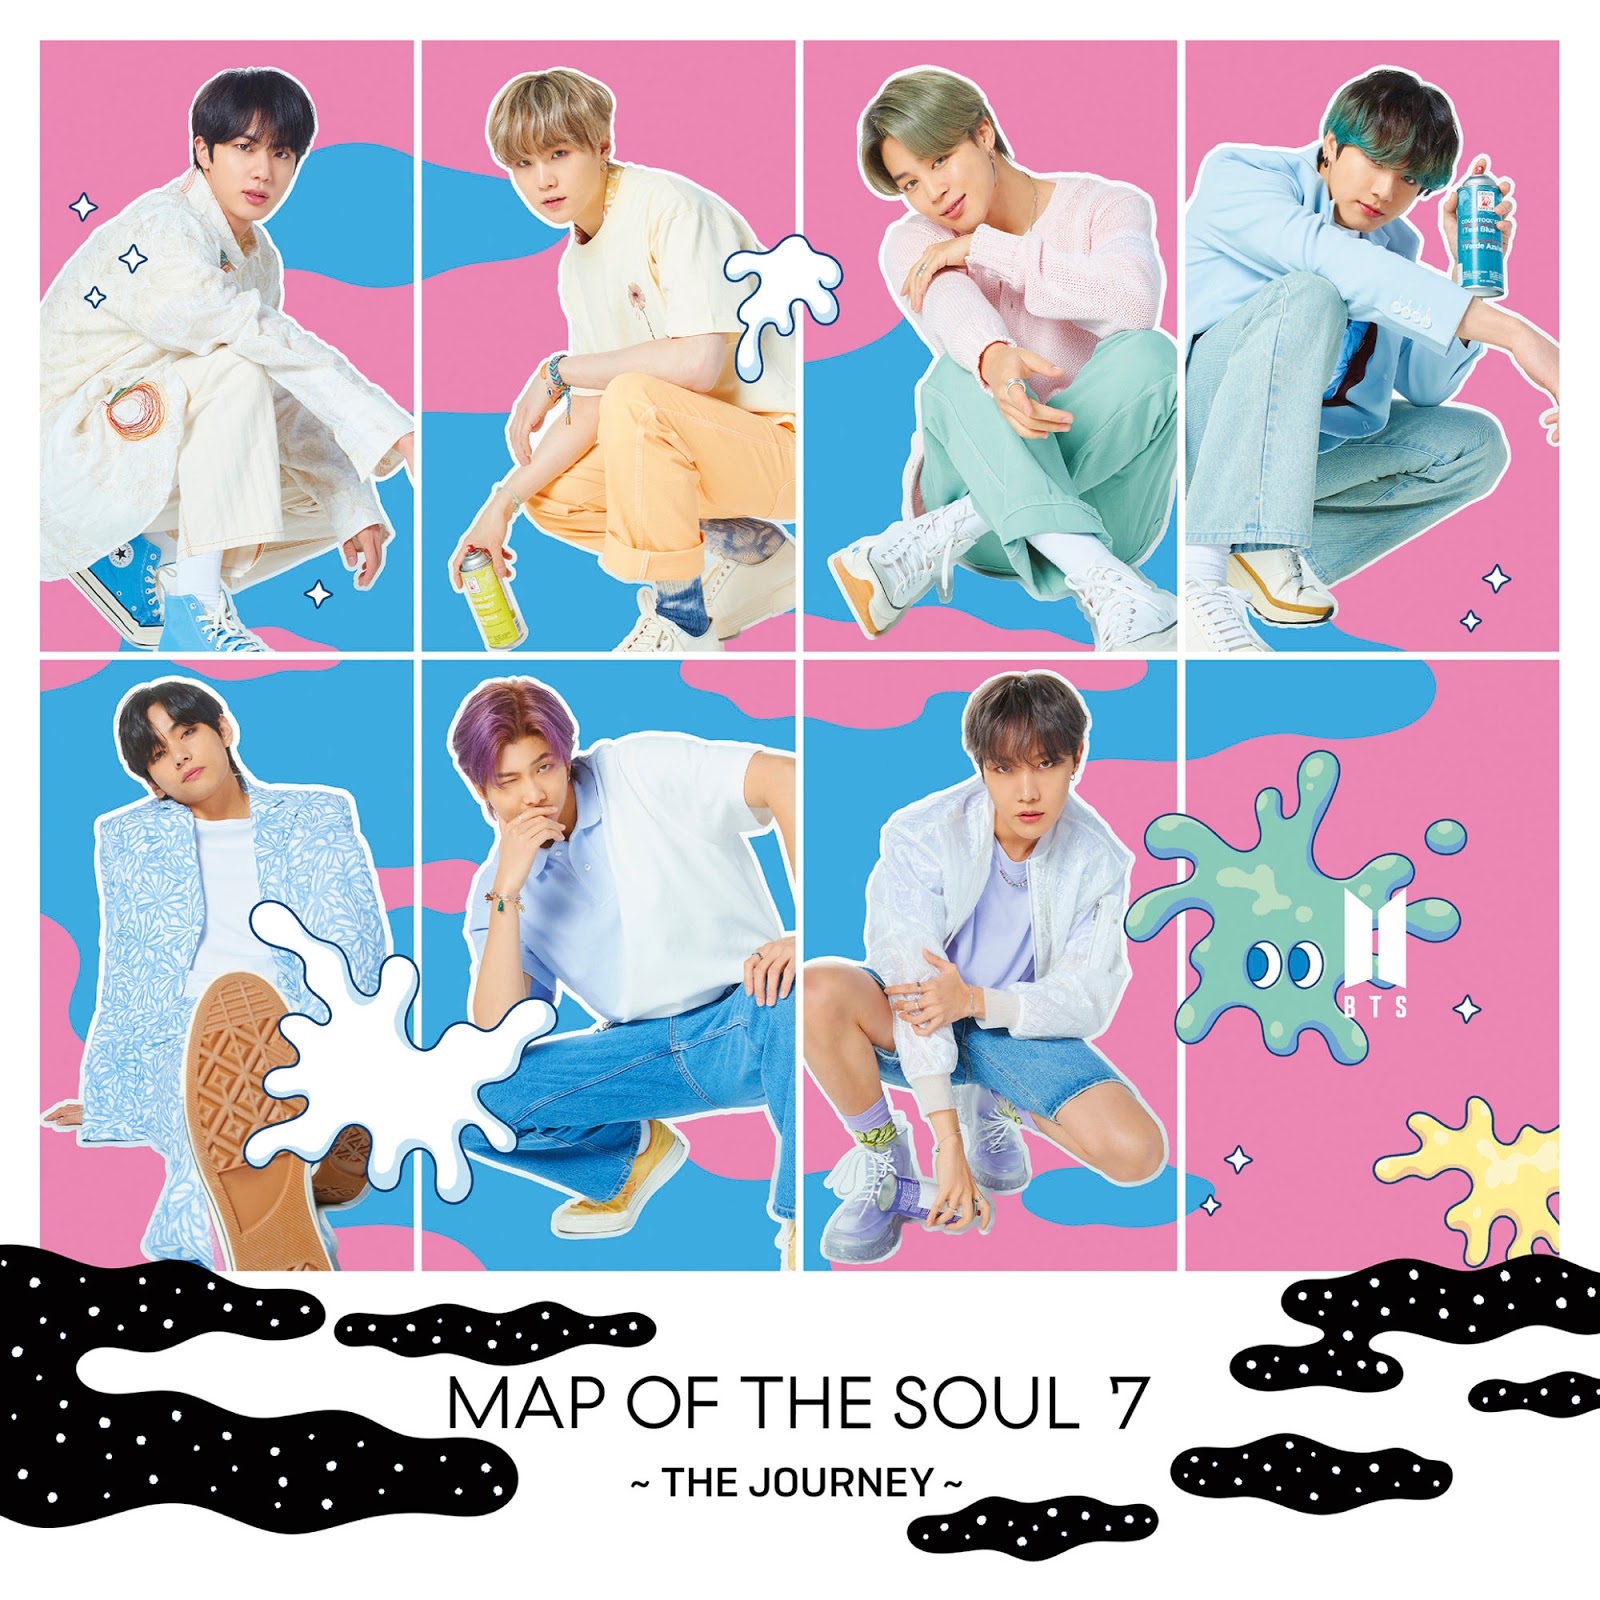 BTS Members Pose Together in The Teaser of The 4th Japanese Album ‘Map of the Soul: 7 ~The Journey~’ 